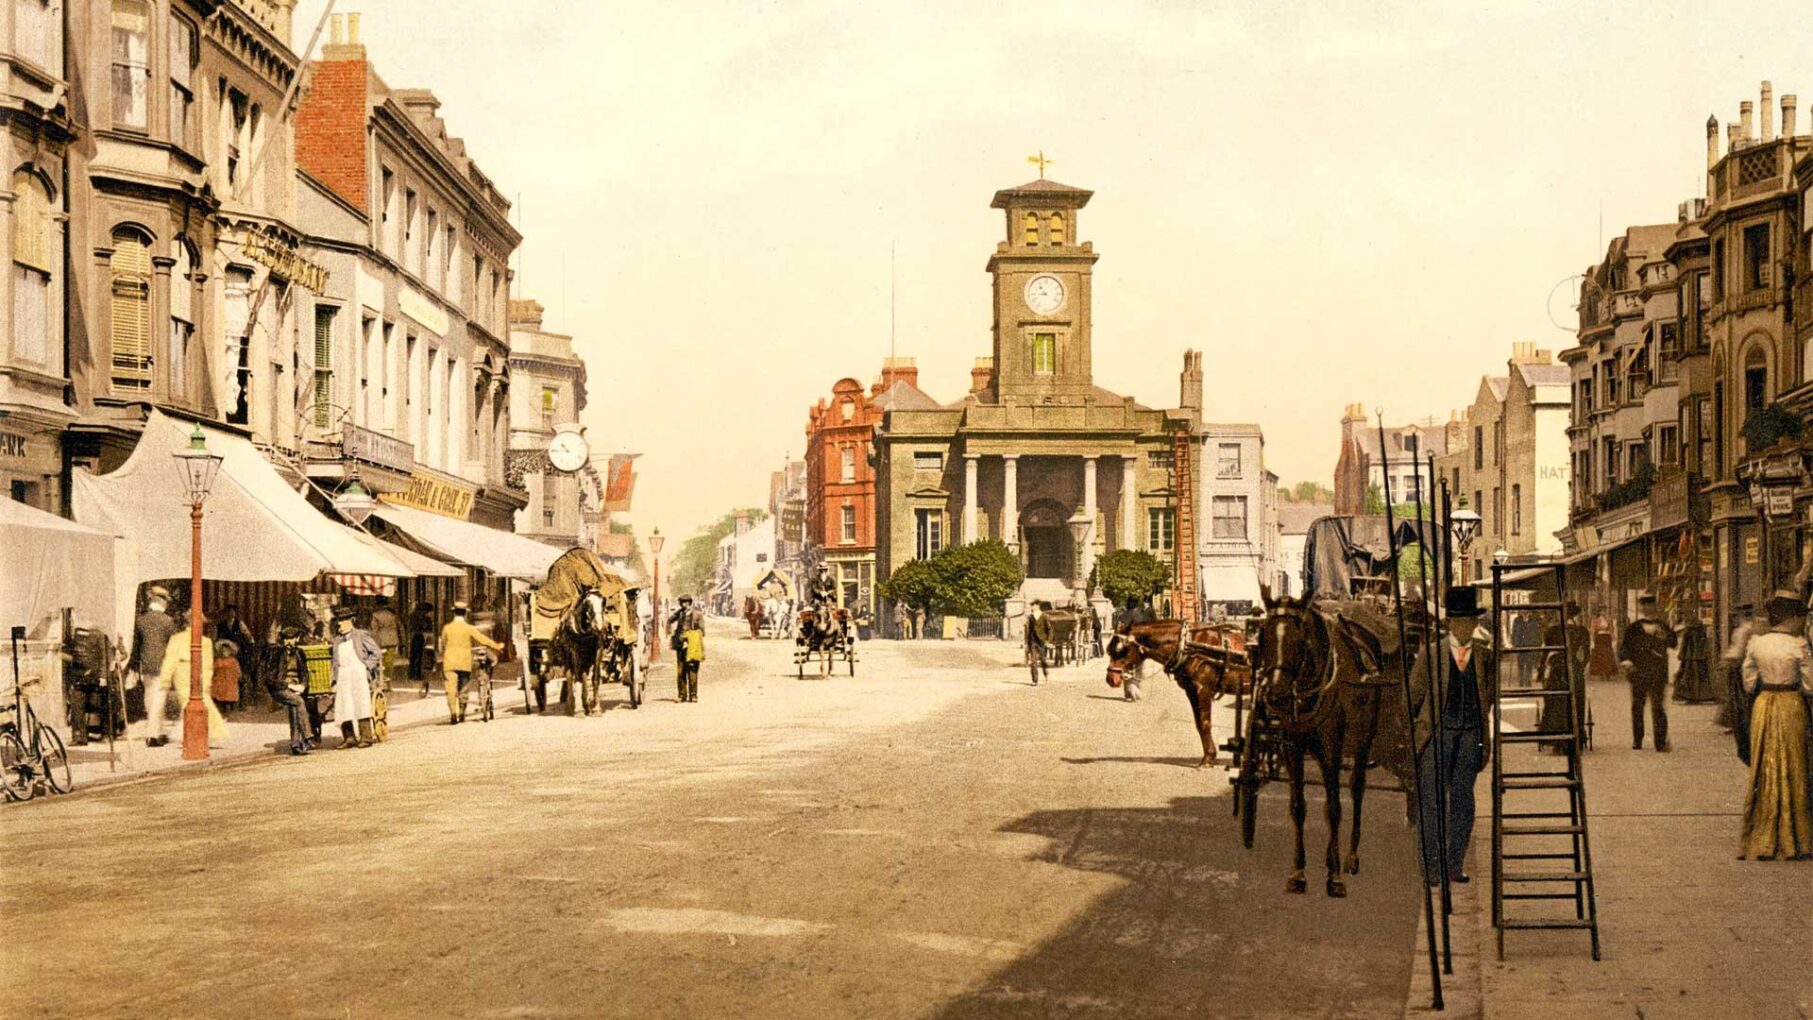 The Old town hall in Worthing from the series Old paintings and postcards of Worthing